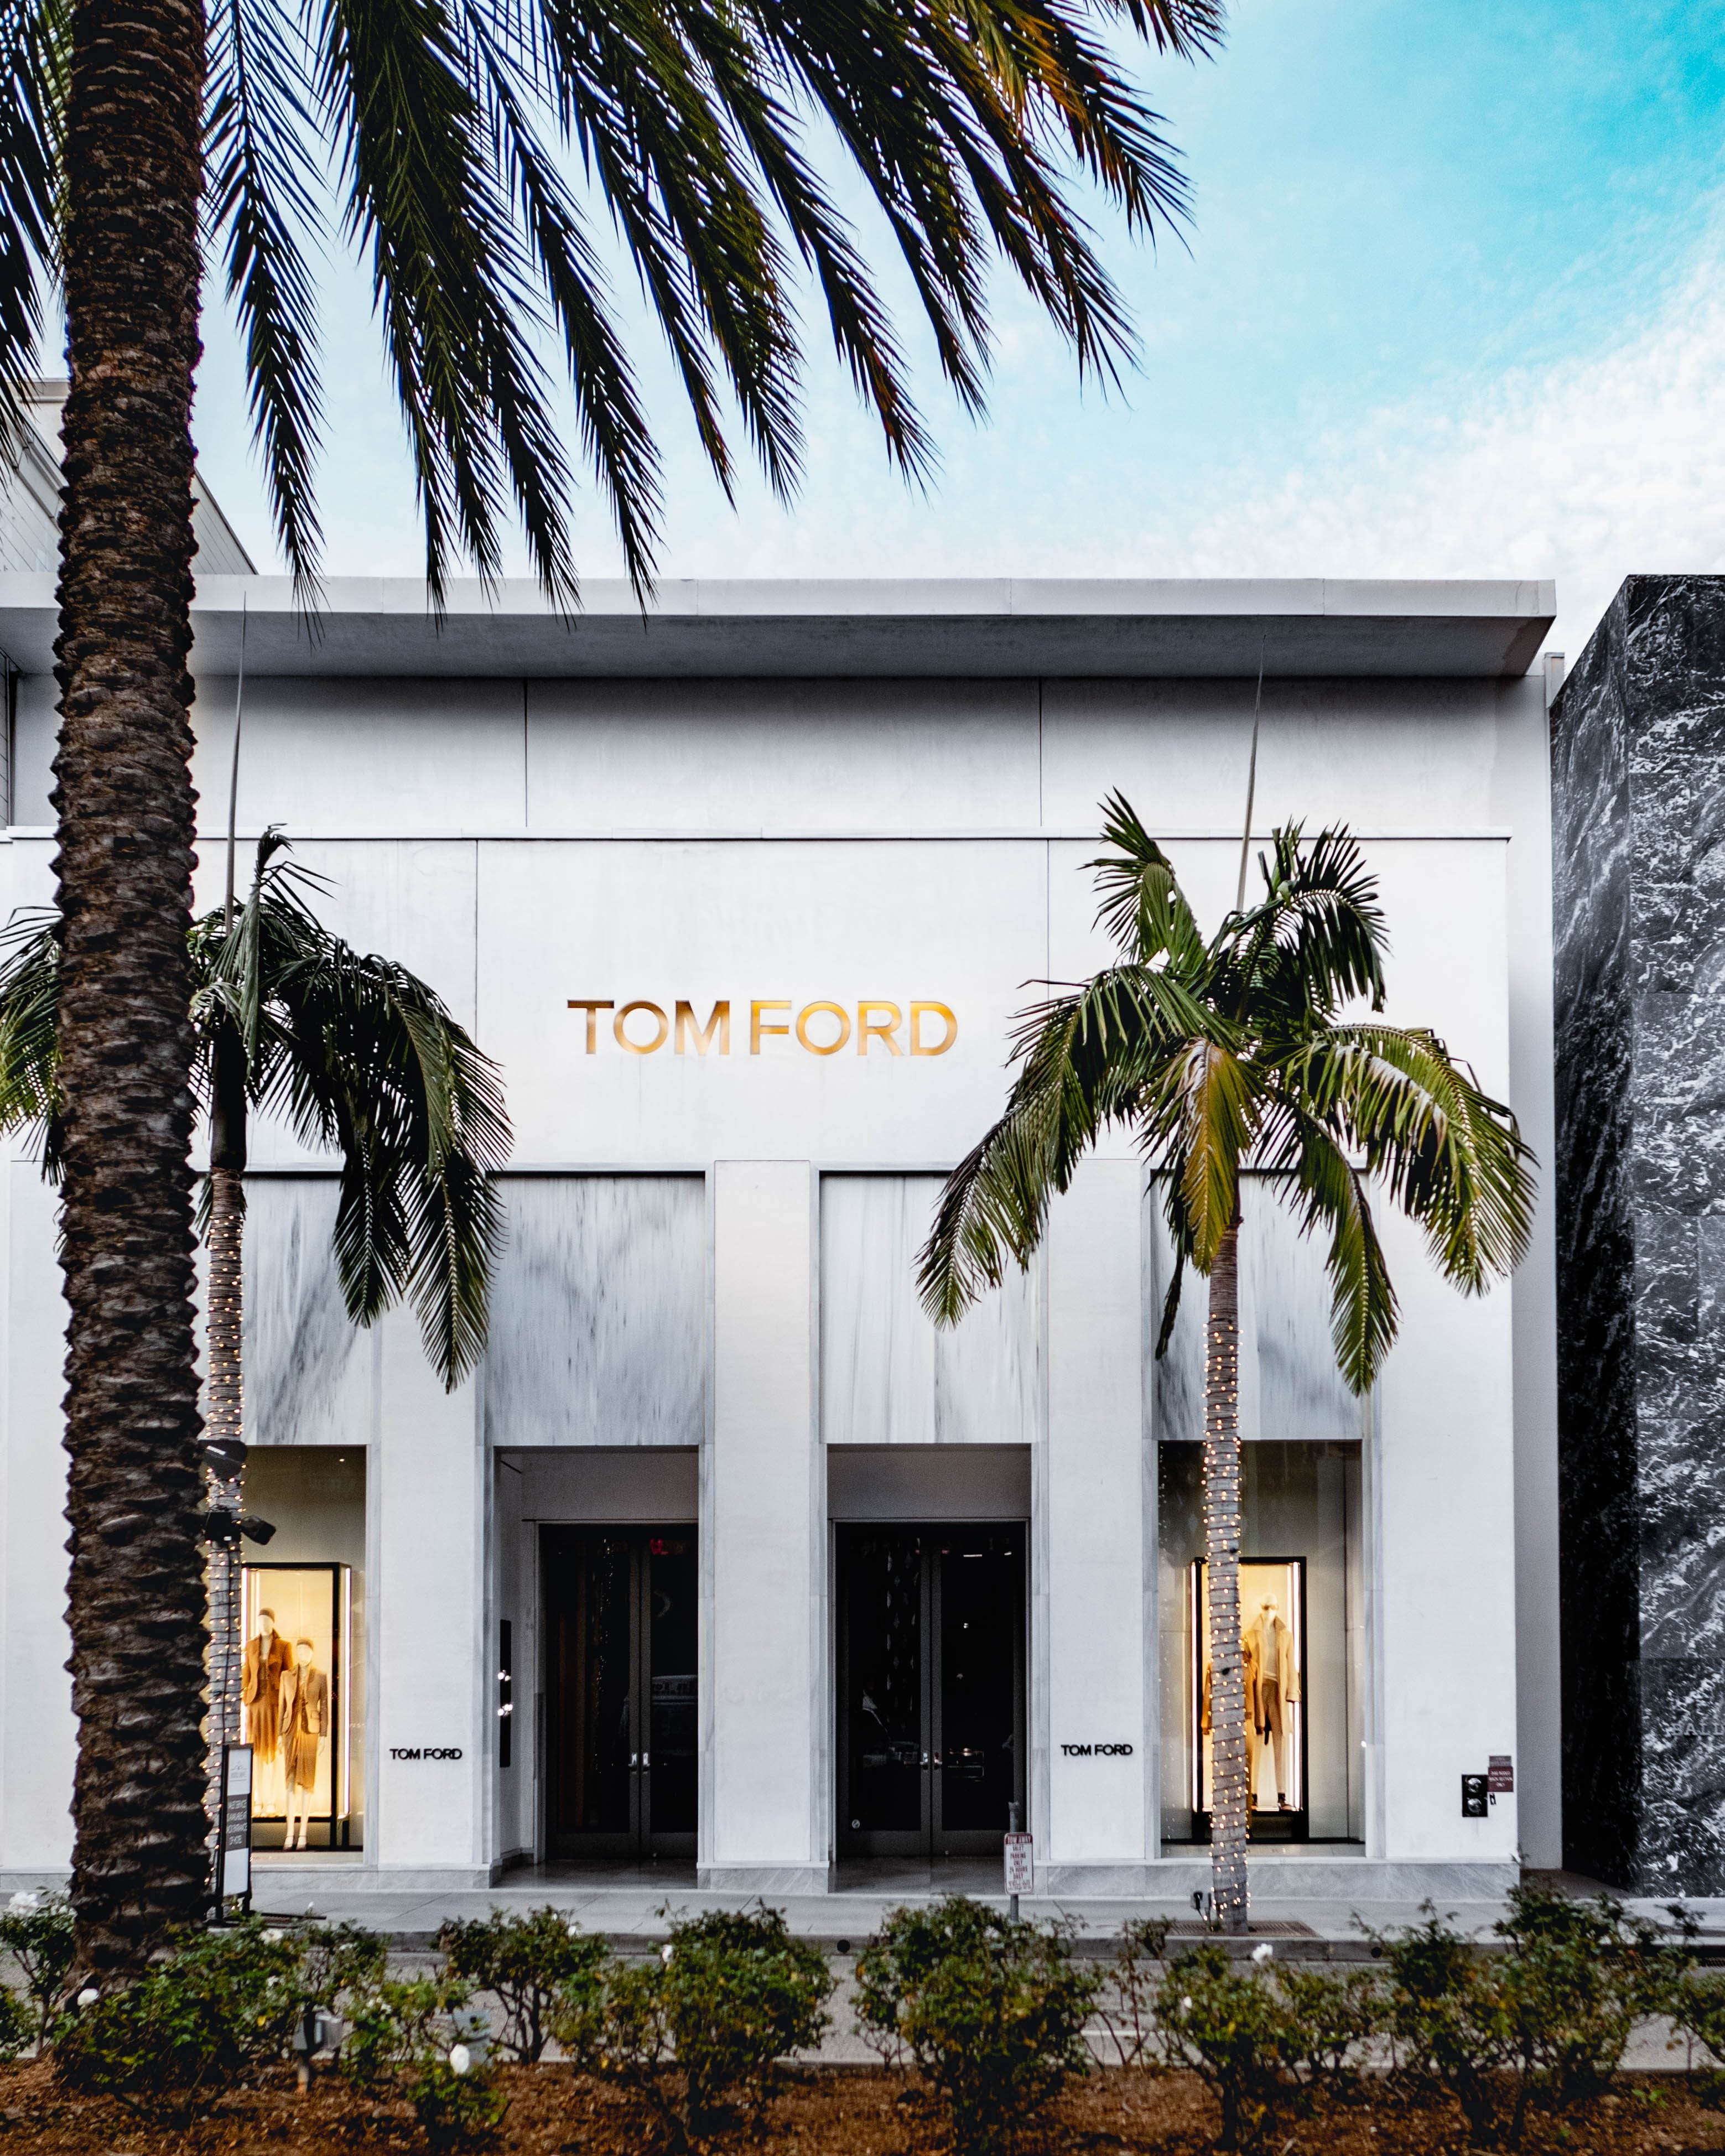 Tom Ford could be objective of acquisition for Estée Lauder